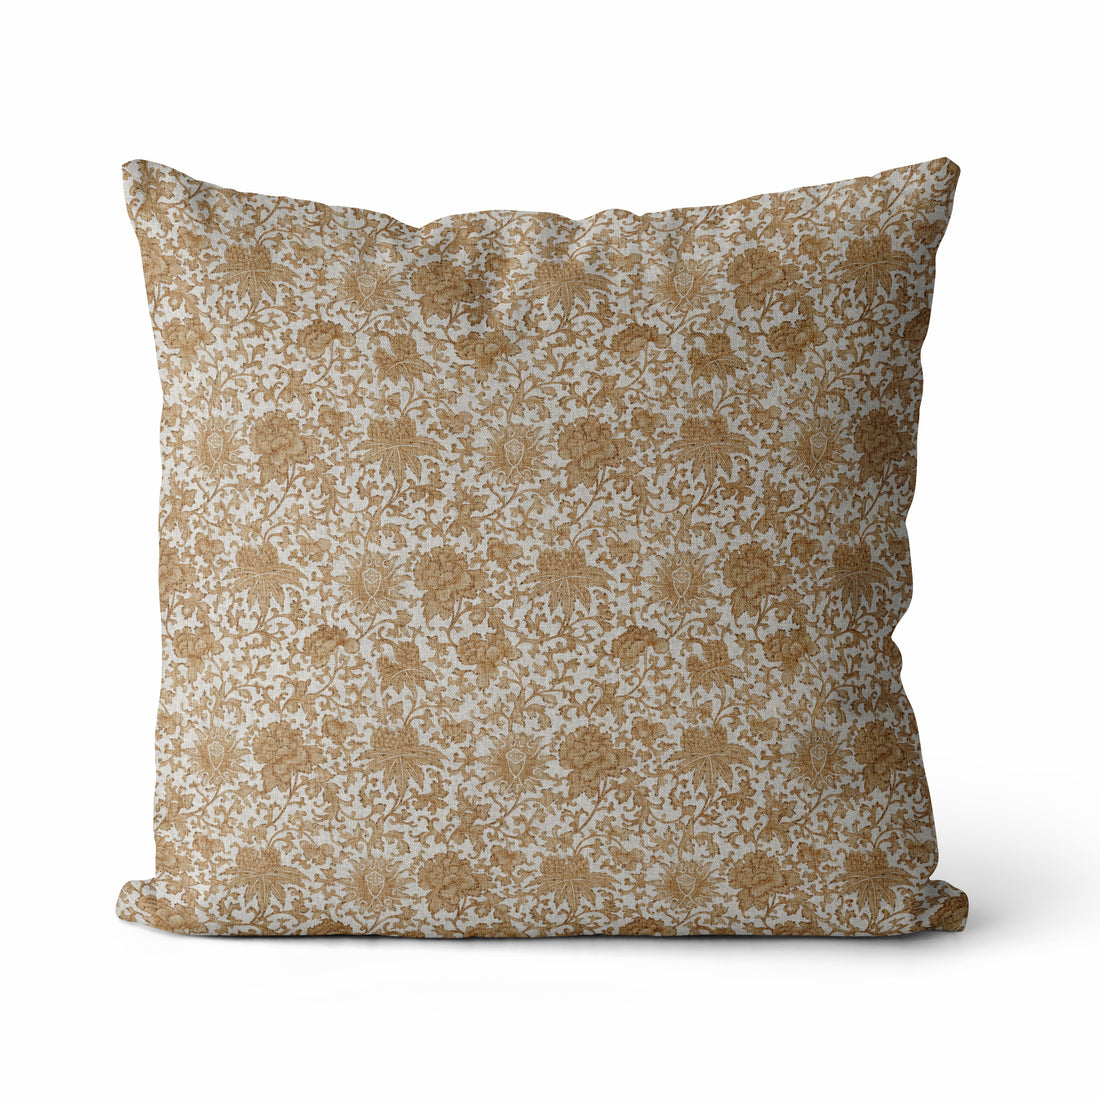 Timeless Blooms I Vintage Floral Pillow Cover